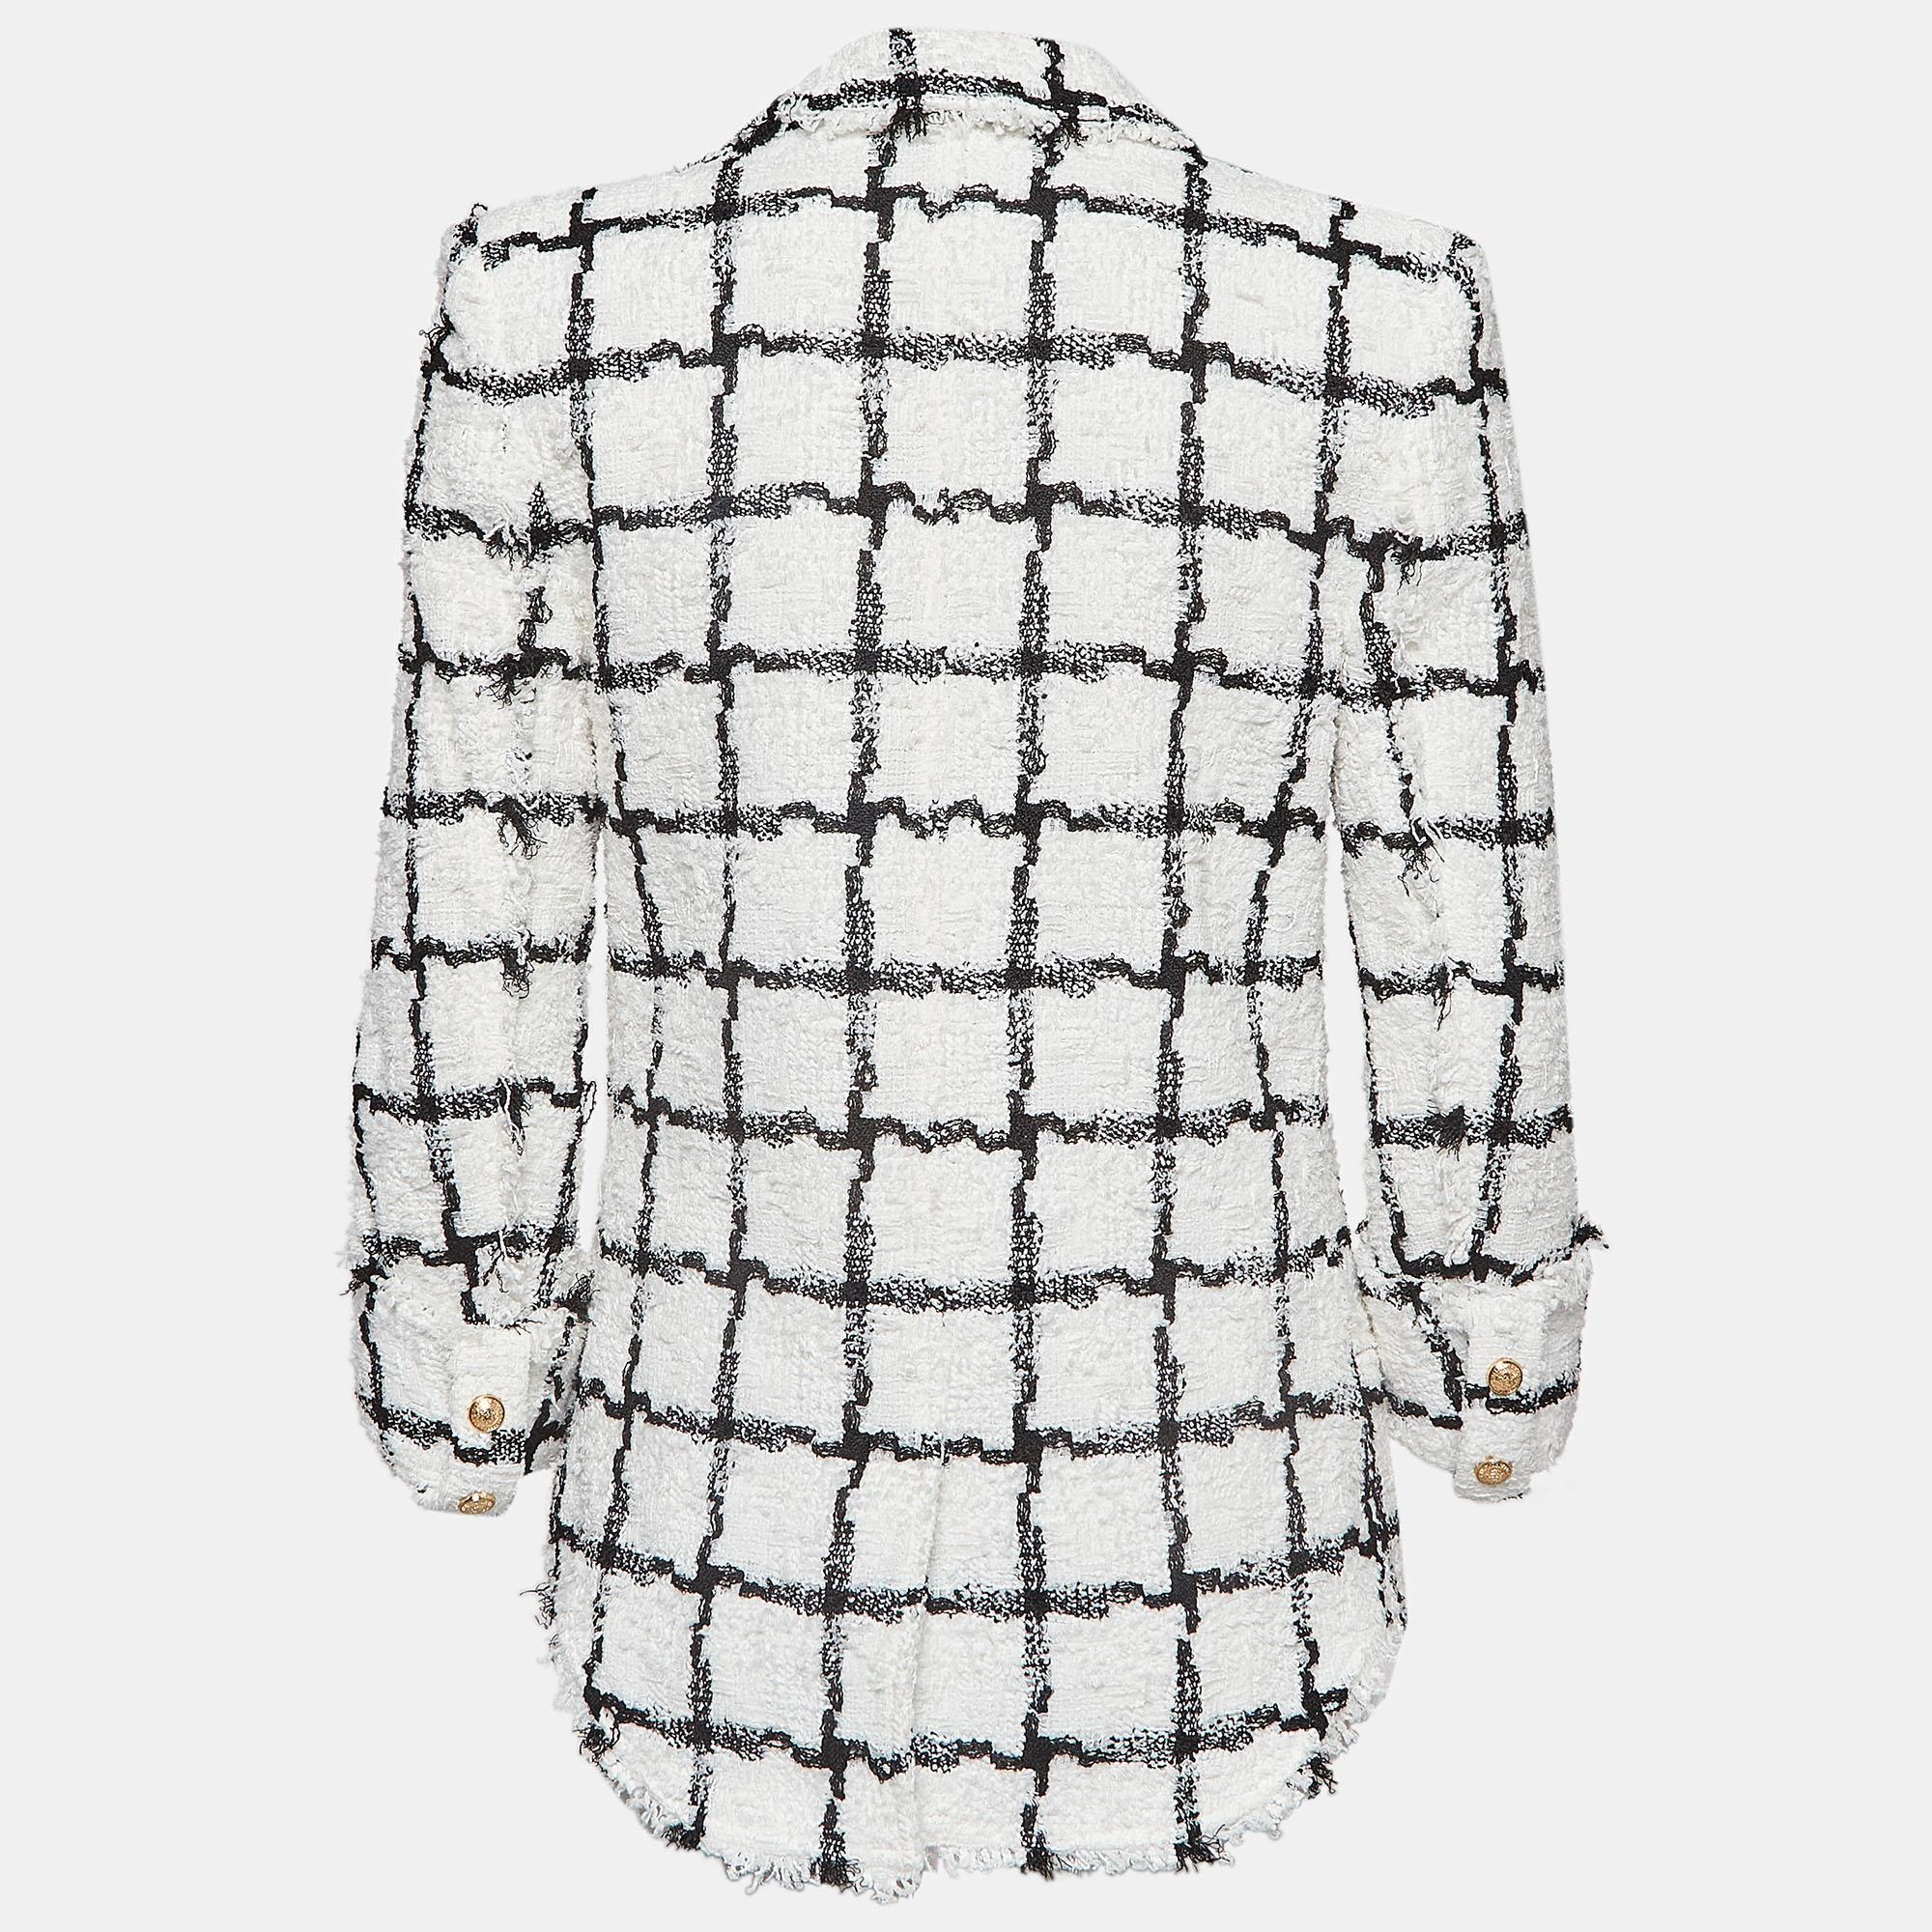 Balmain's flawless tailoring is unmatchable and this short dress exemplifies that. Made using tweed, the entire dress is covered in a check pattern The structured shoulders hark back to the iconic Balmain blazers and the fitted silhouette is perfect